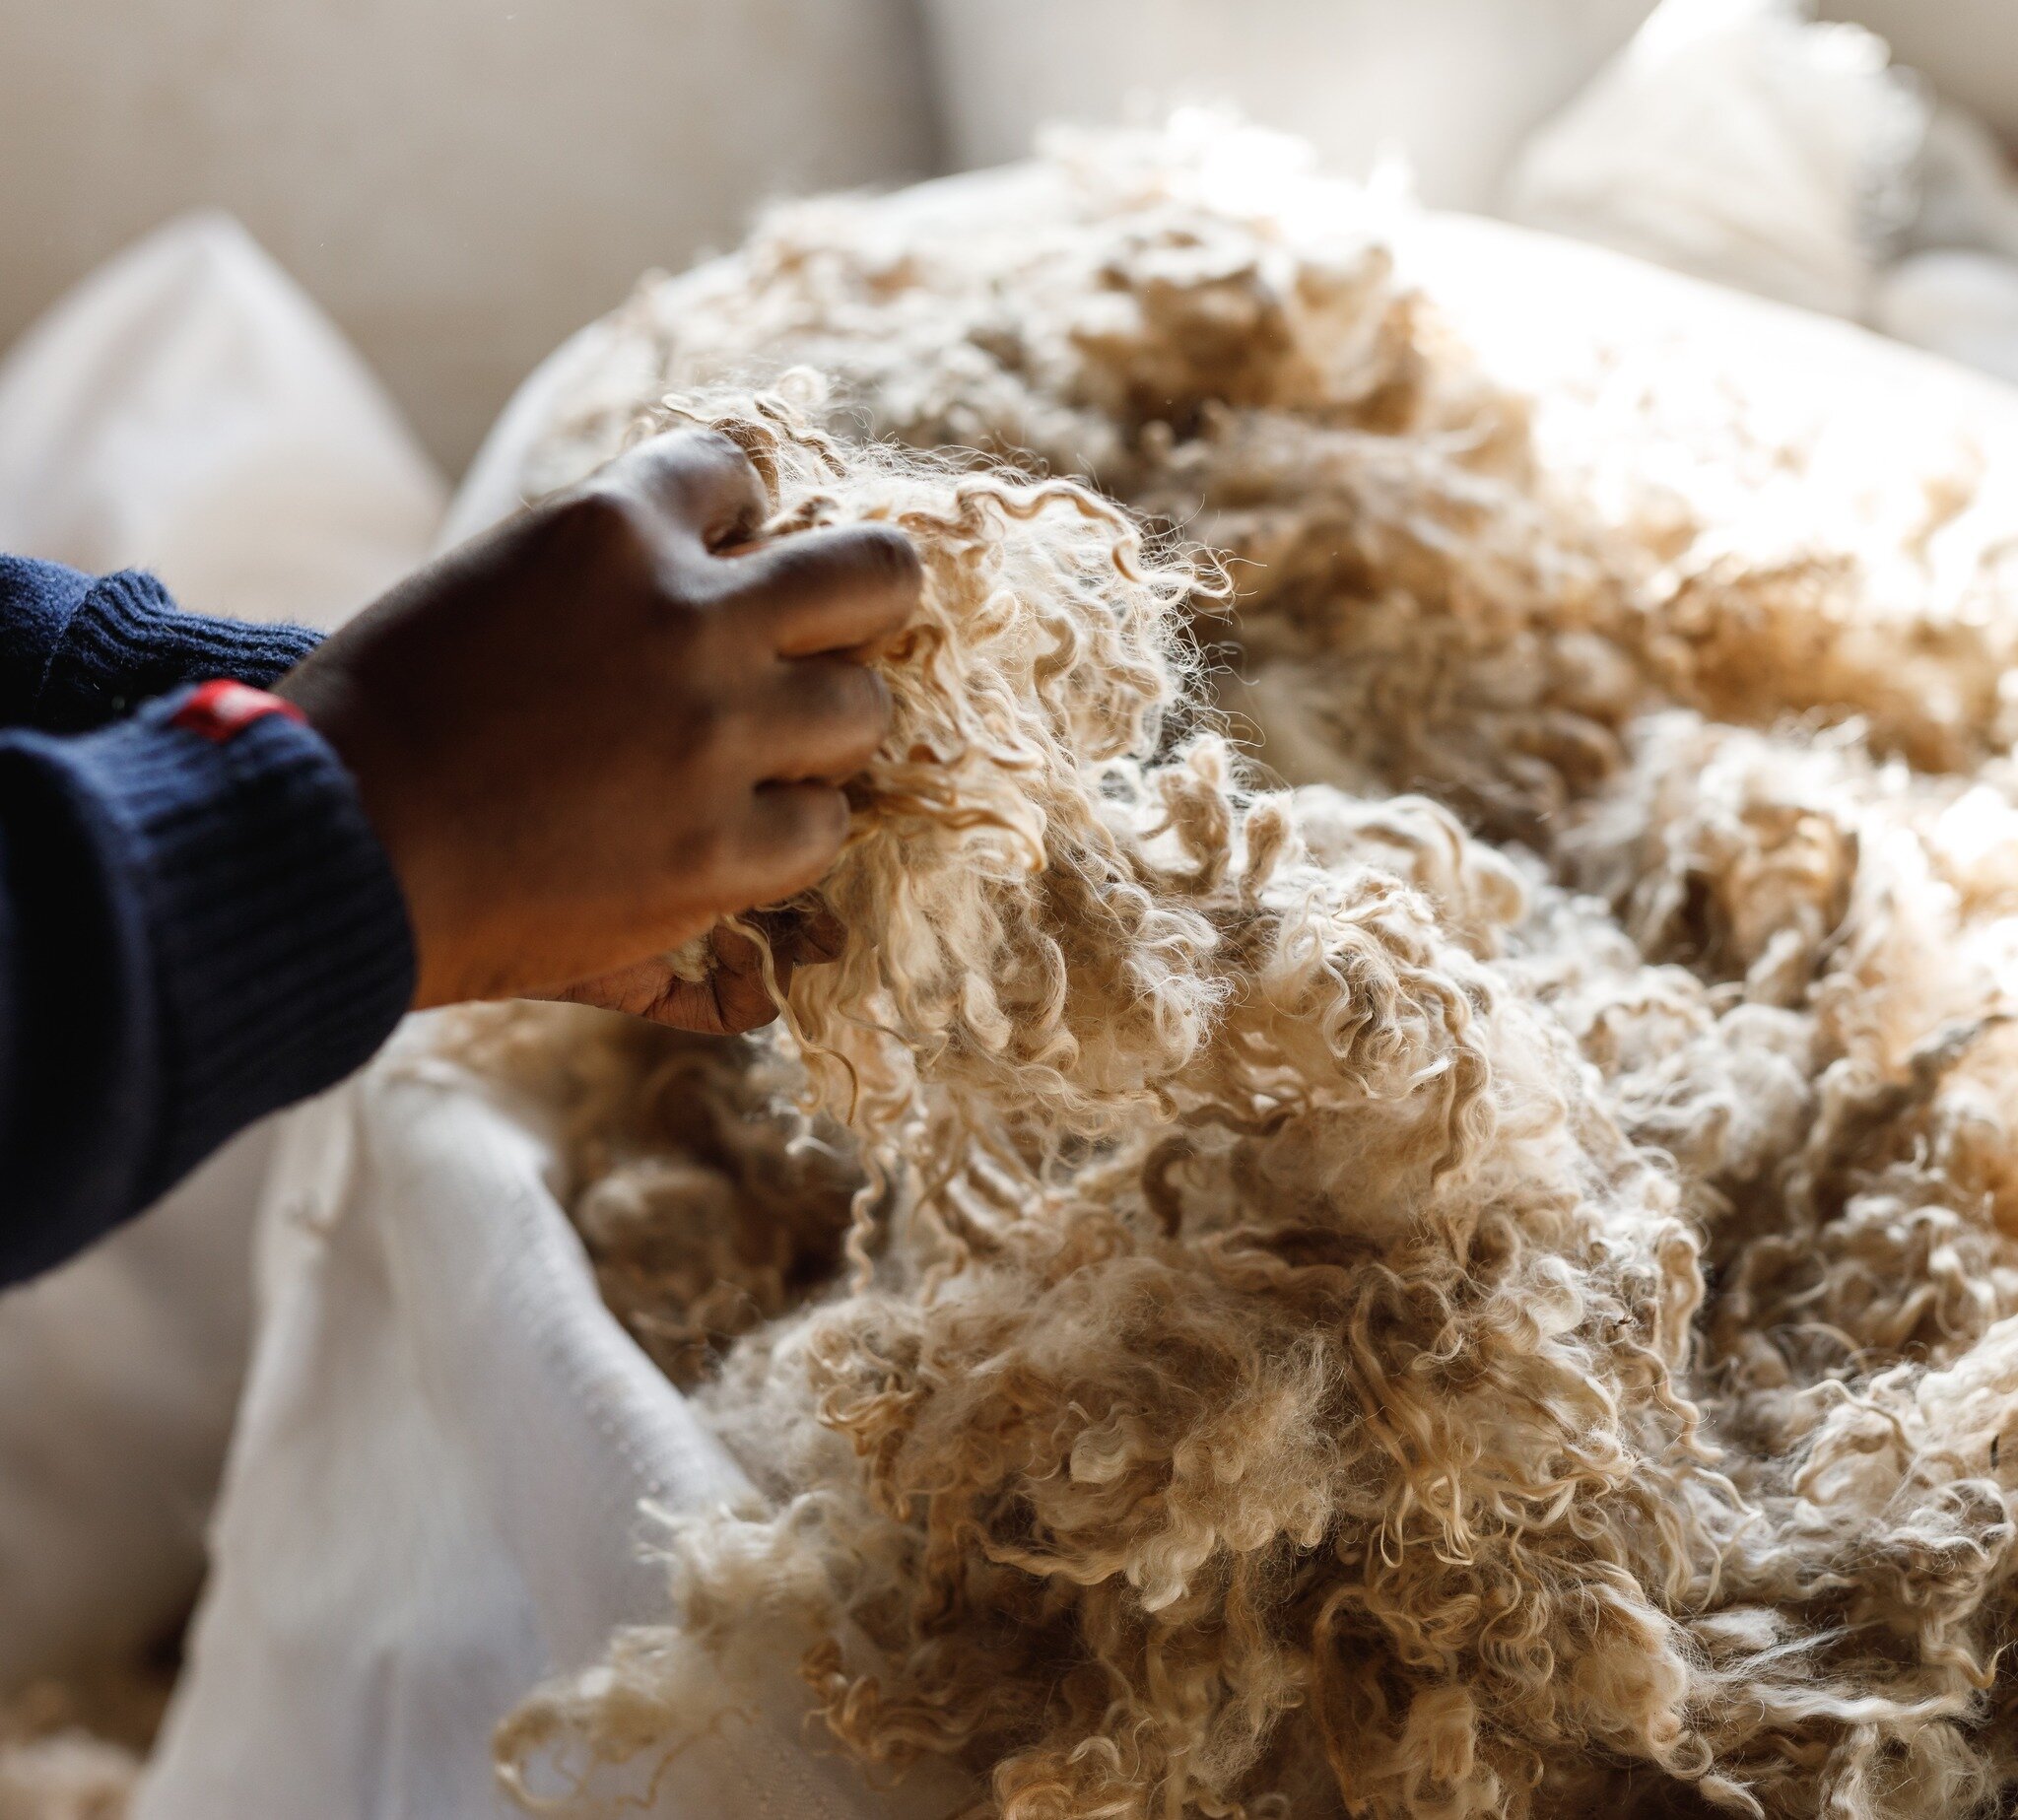 The 6th Mohair Sale of the Winer Season ✨ takes place on the 22nd of November 2022. There will be 100 288kg of mohair on offer, of which 86% is RMS certified (86 873kgs).

As always we'd like to wish all the sellers &amp; buyers the best of luck. 

#